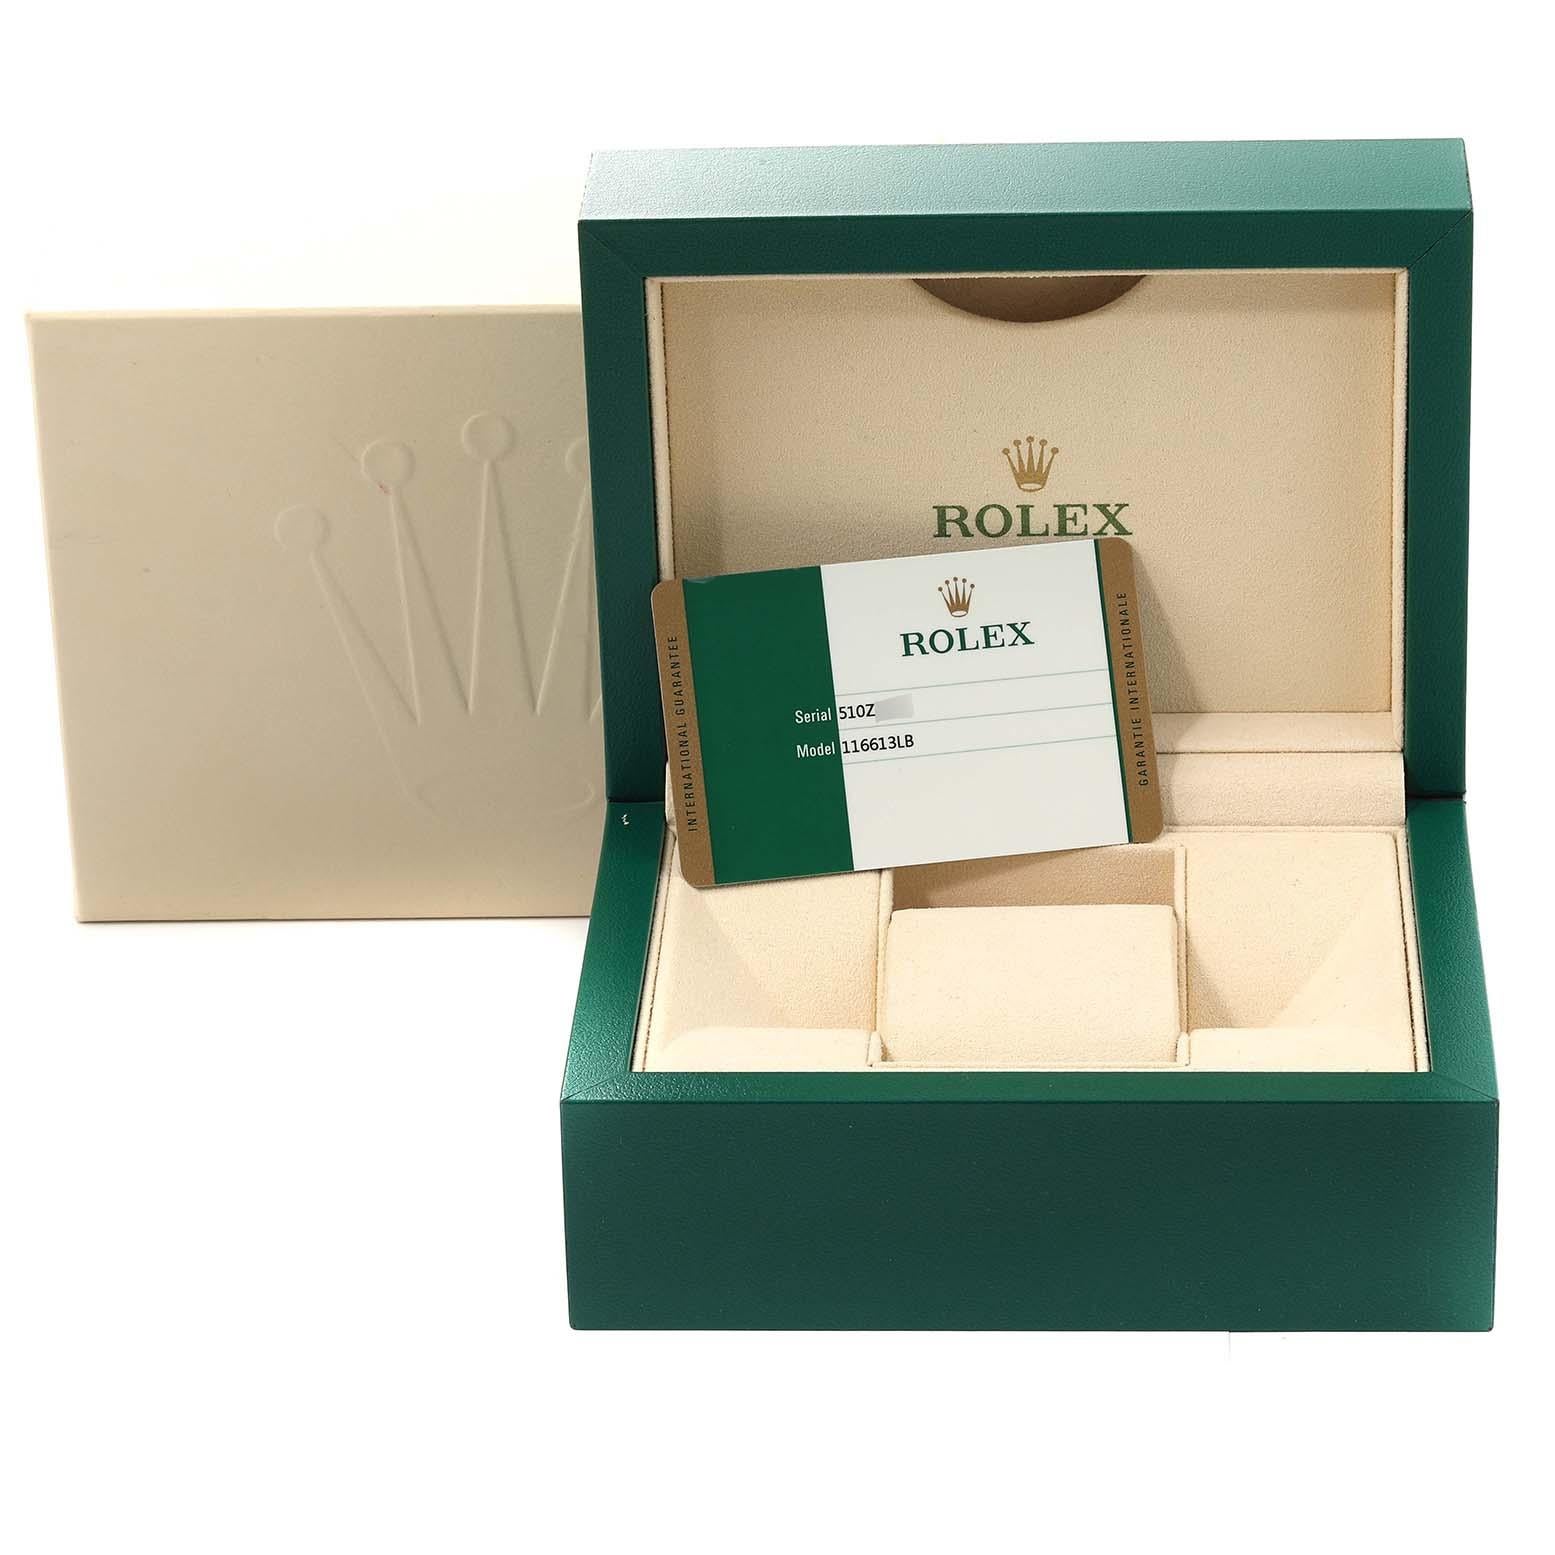 Rolex Submariner Steel Yellow Gold Blue Dial Mens Watch 116613 Box Card 7